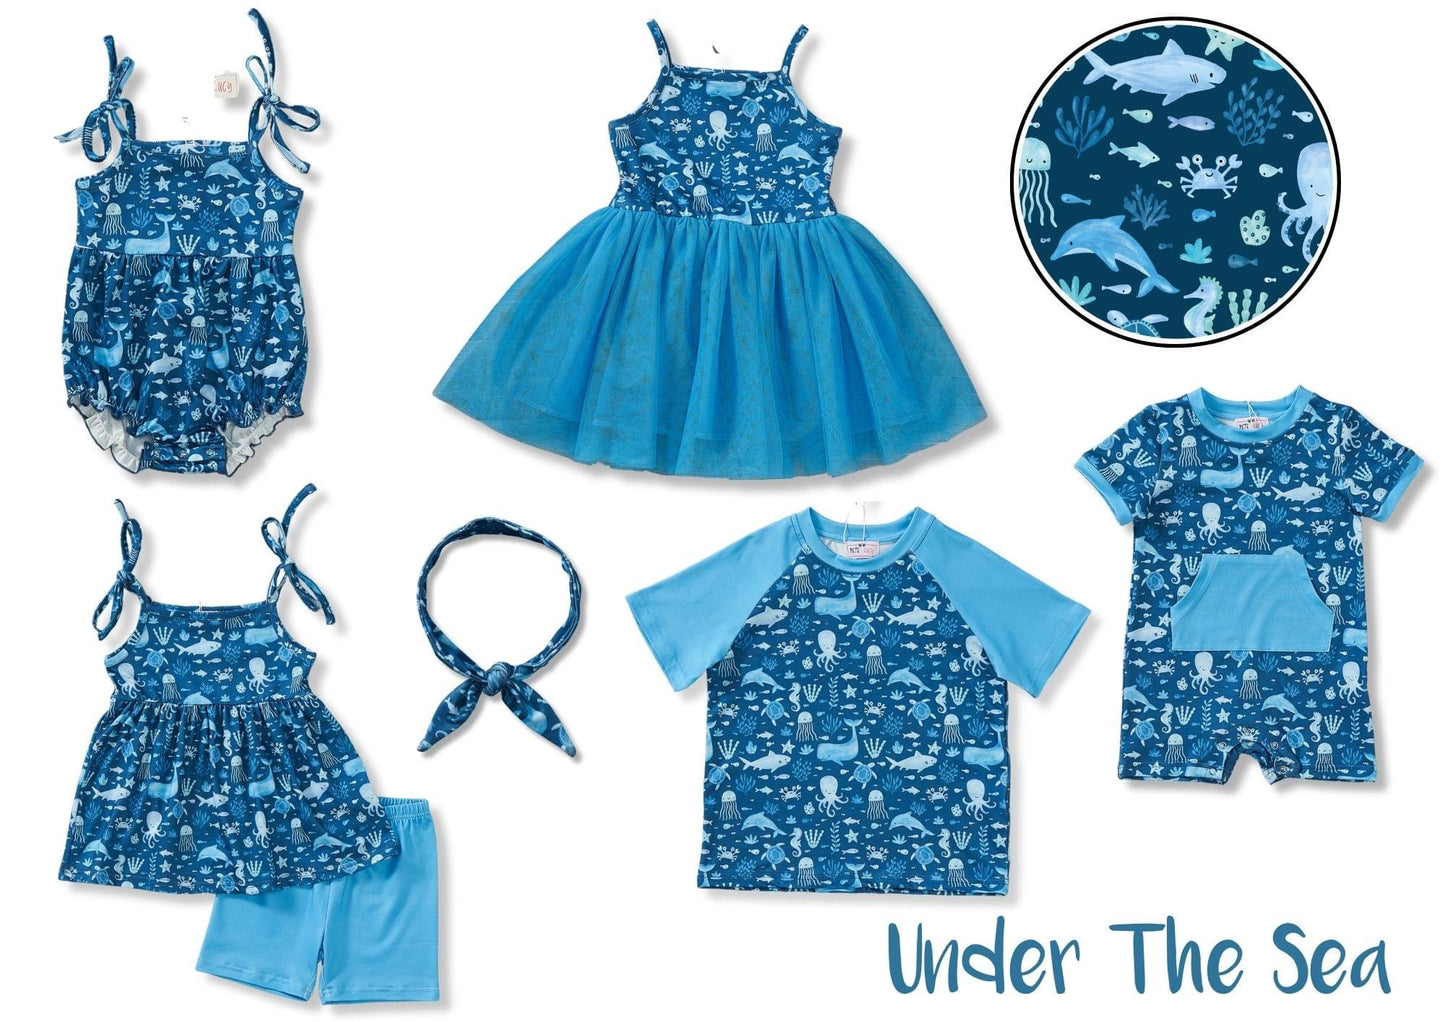 (Preorder) Under the Sea Boy’s Infant Romper by Pete + Lucy